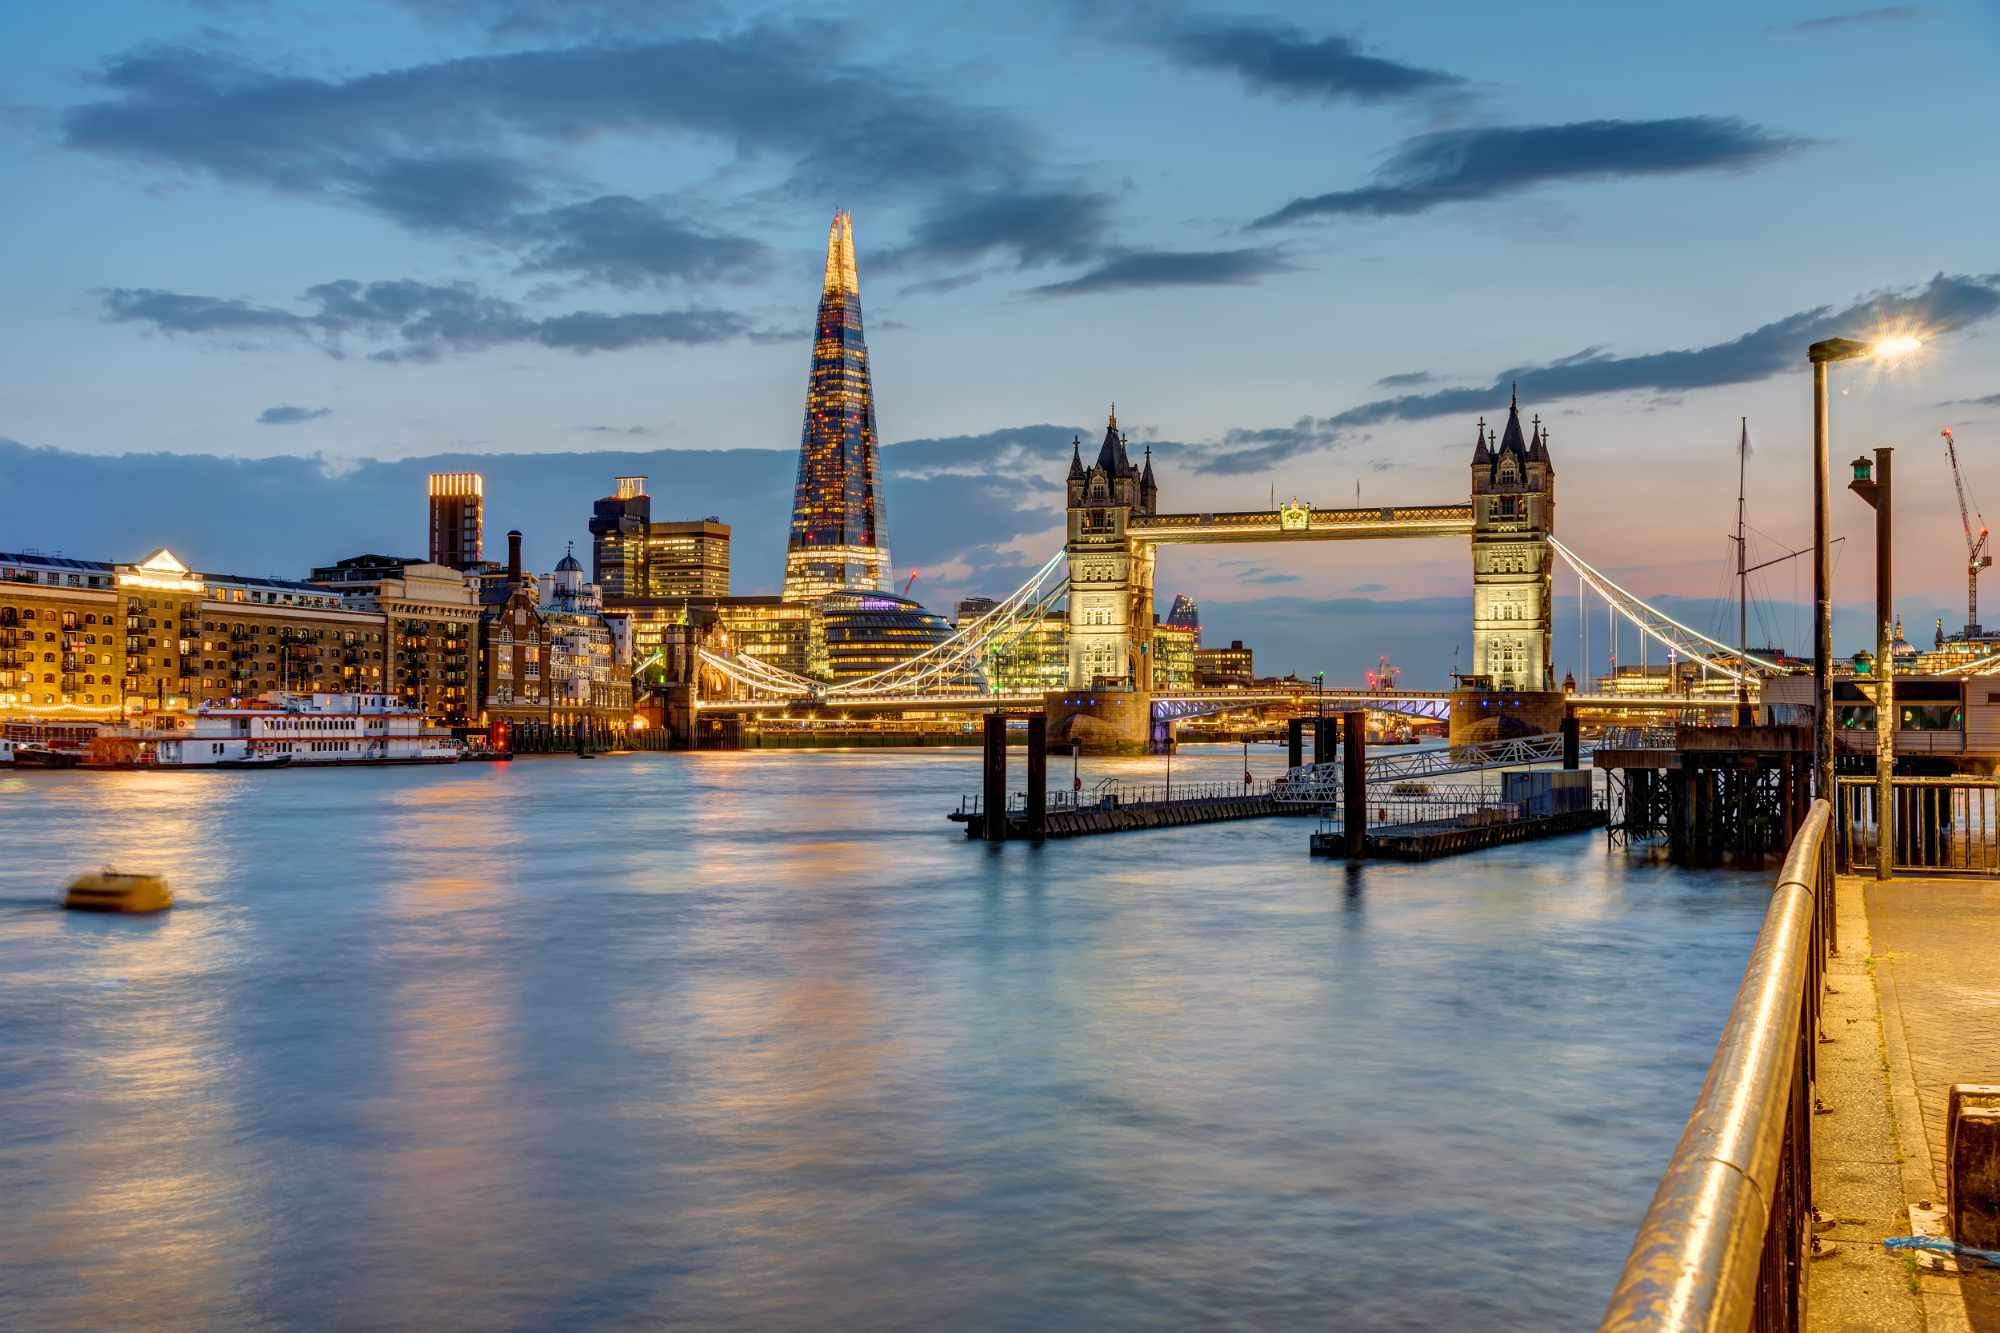 View of the river Thames in London after sunset